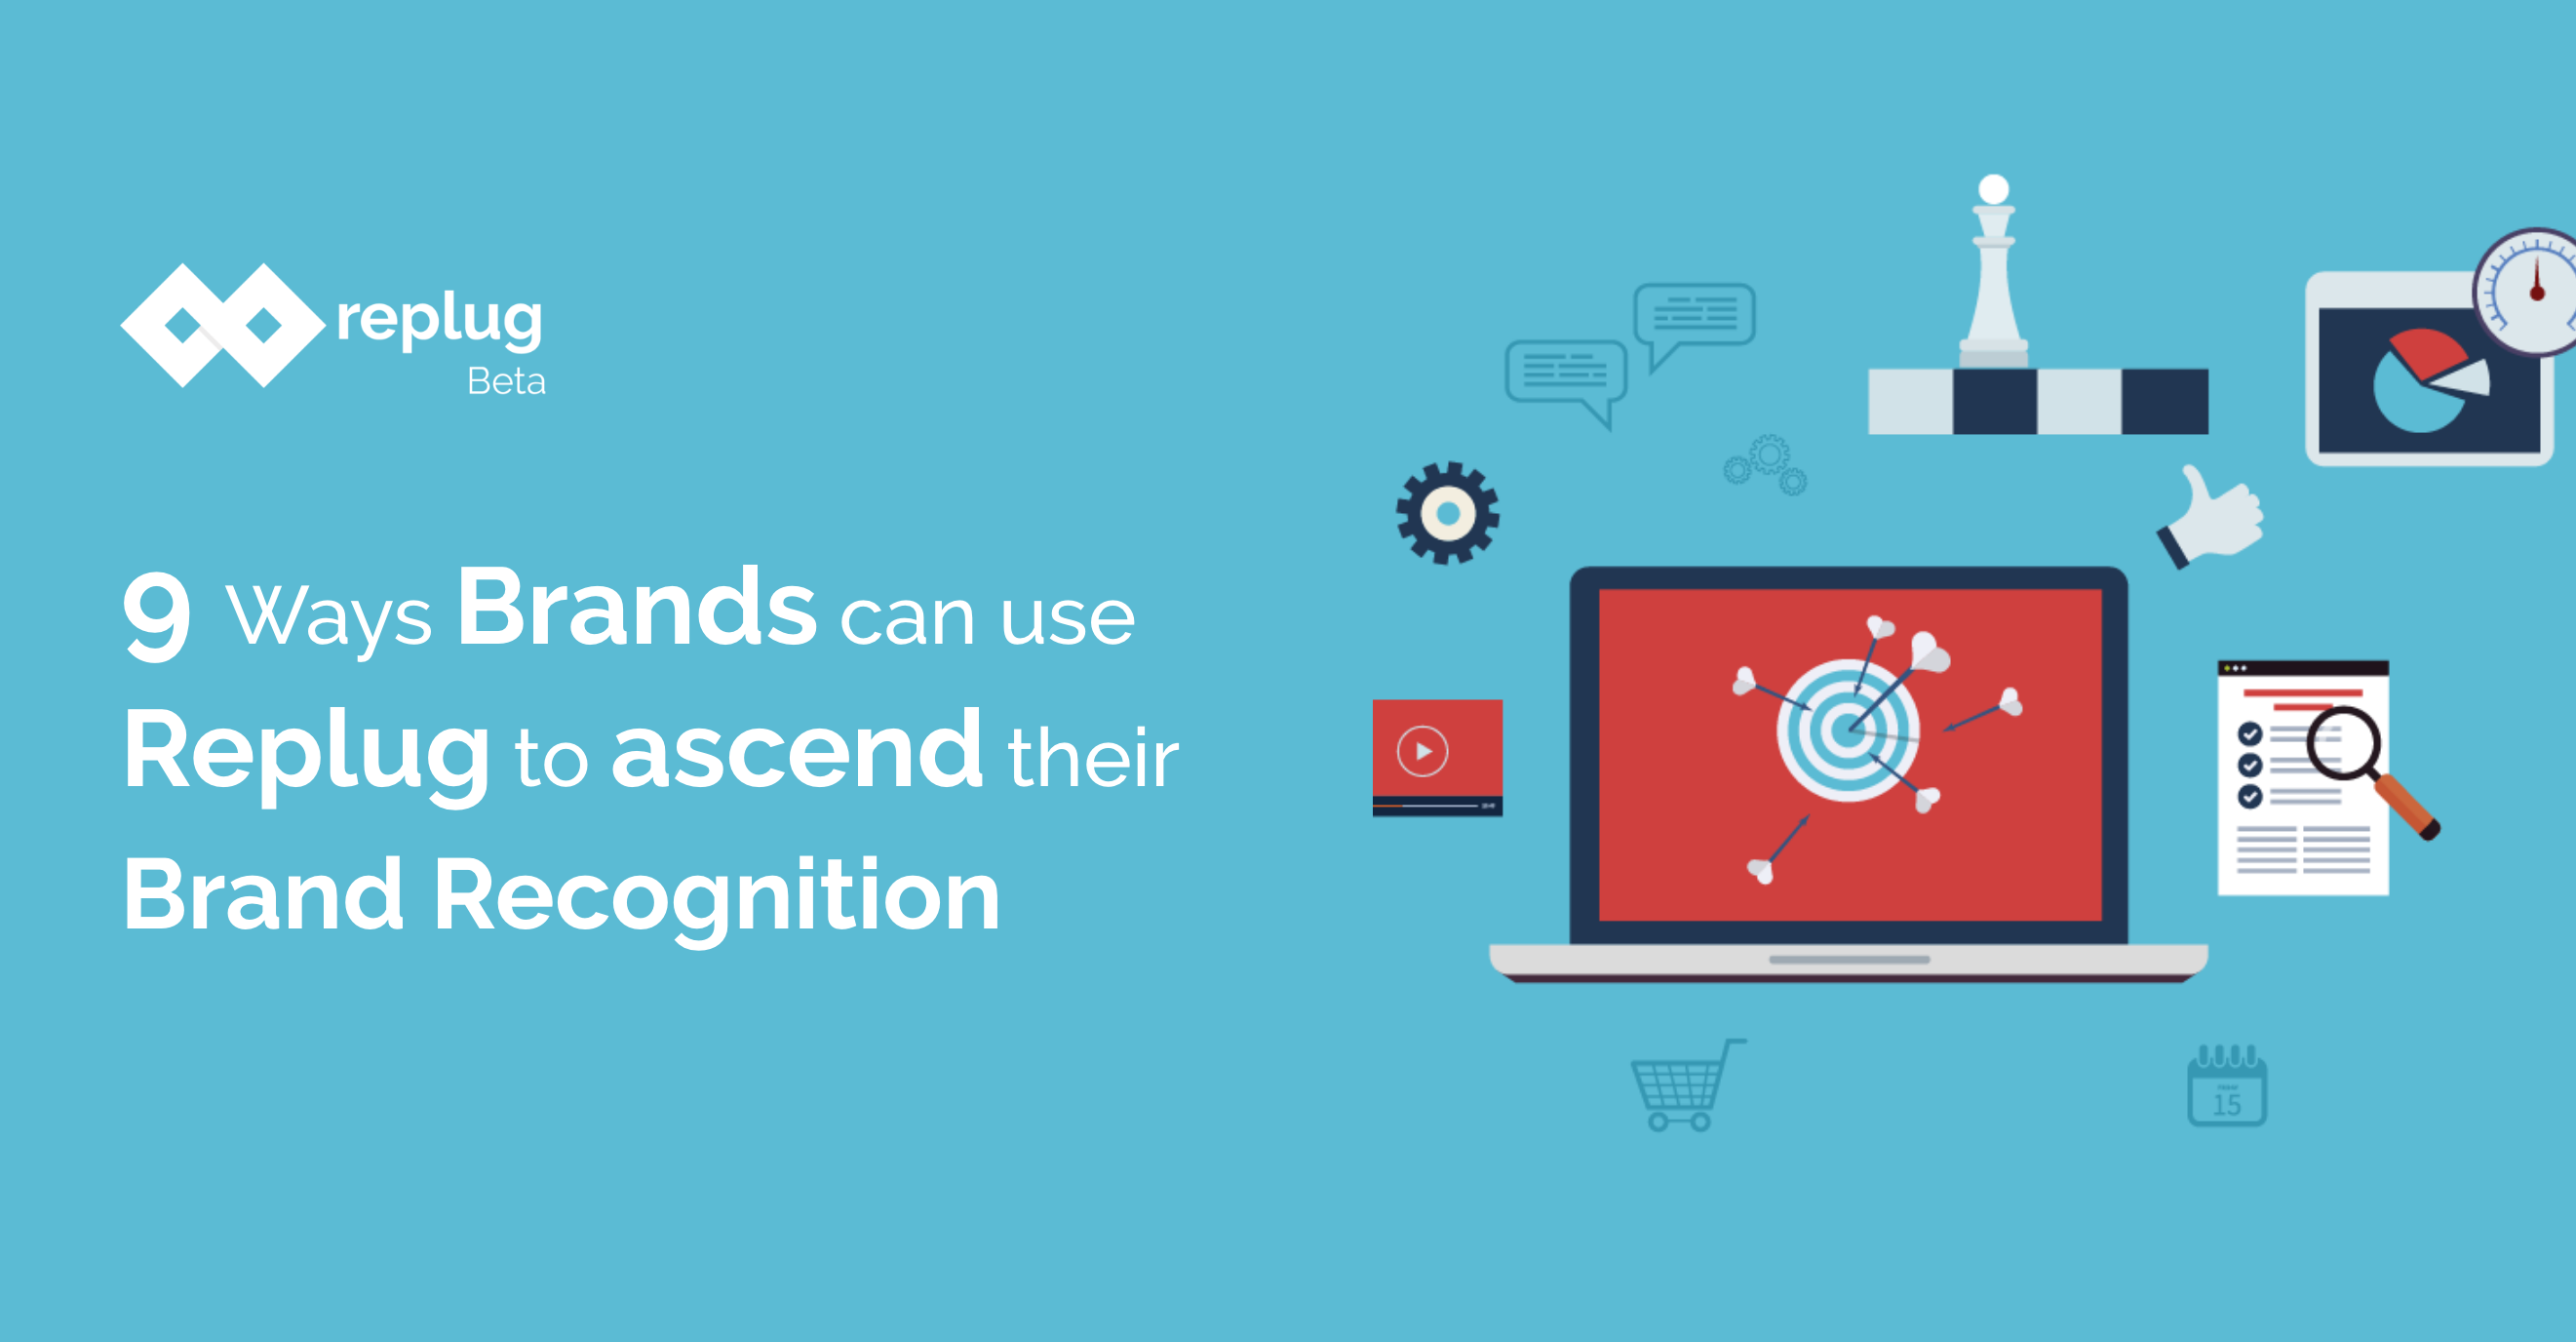 9 Ways Brands can use Replug to ascend their Brand Recognition